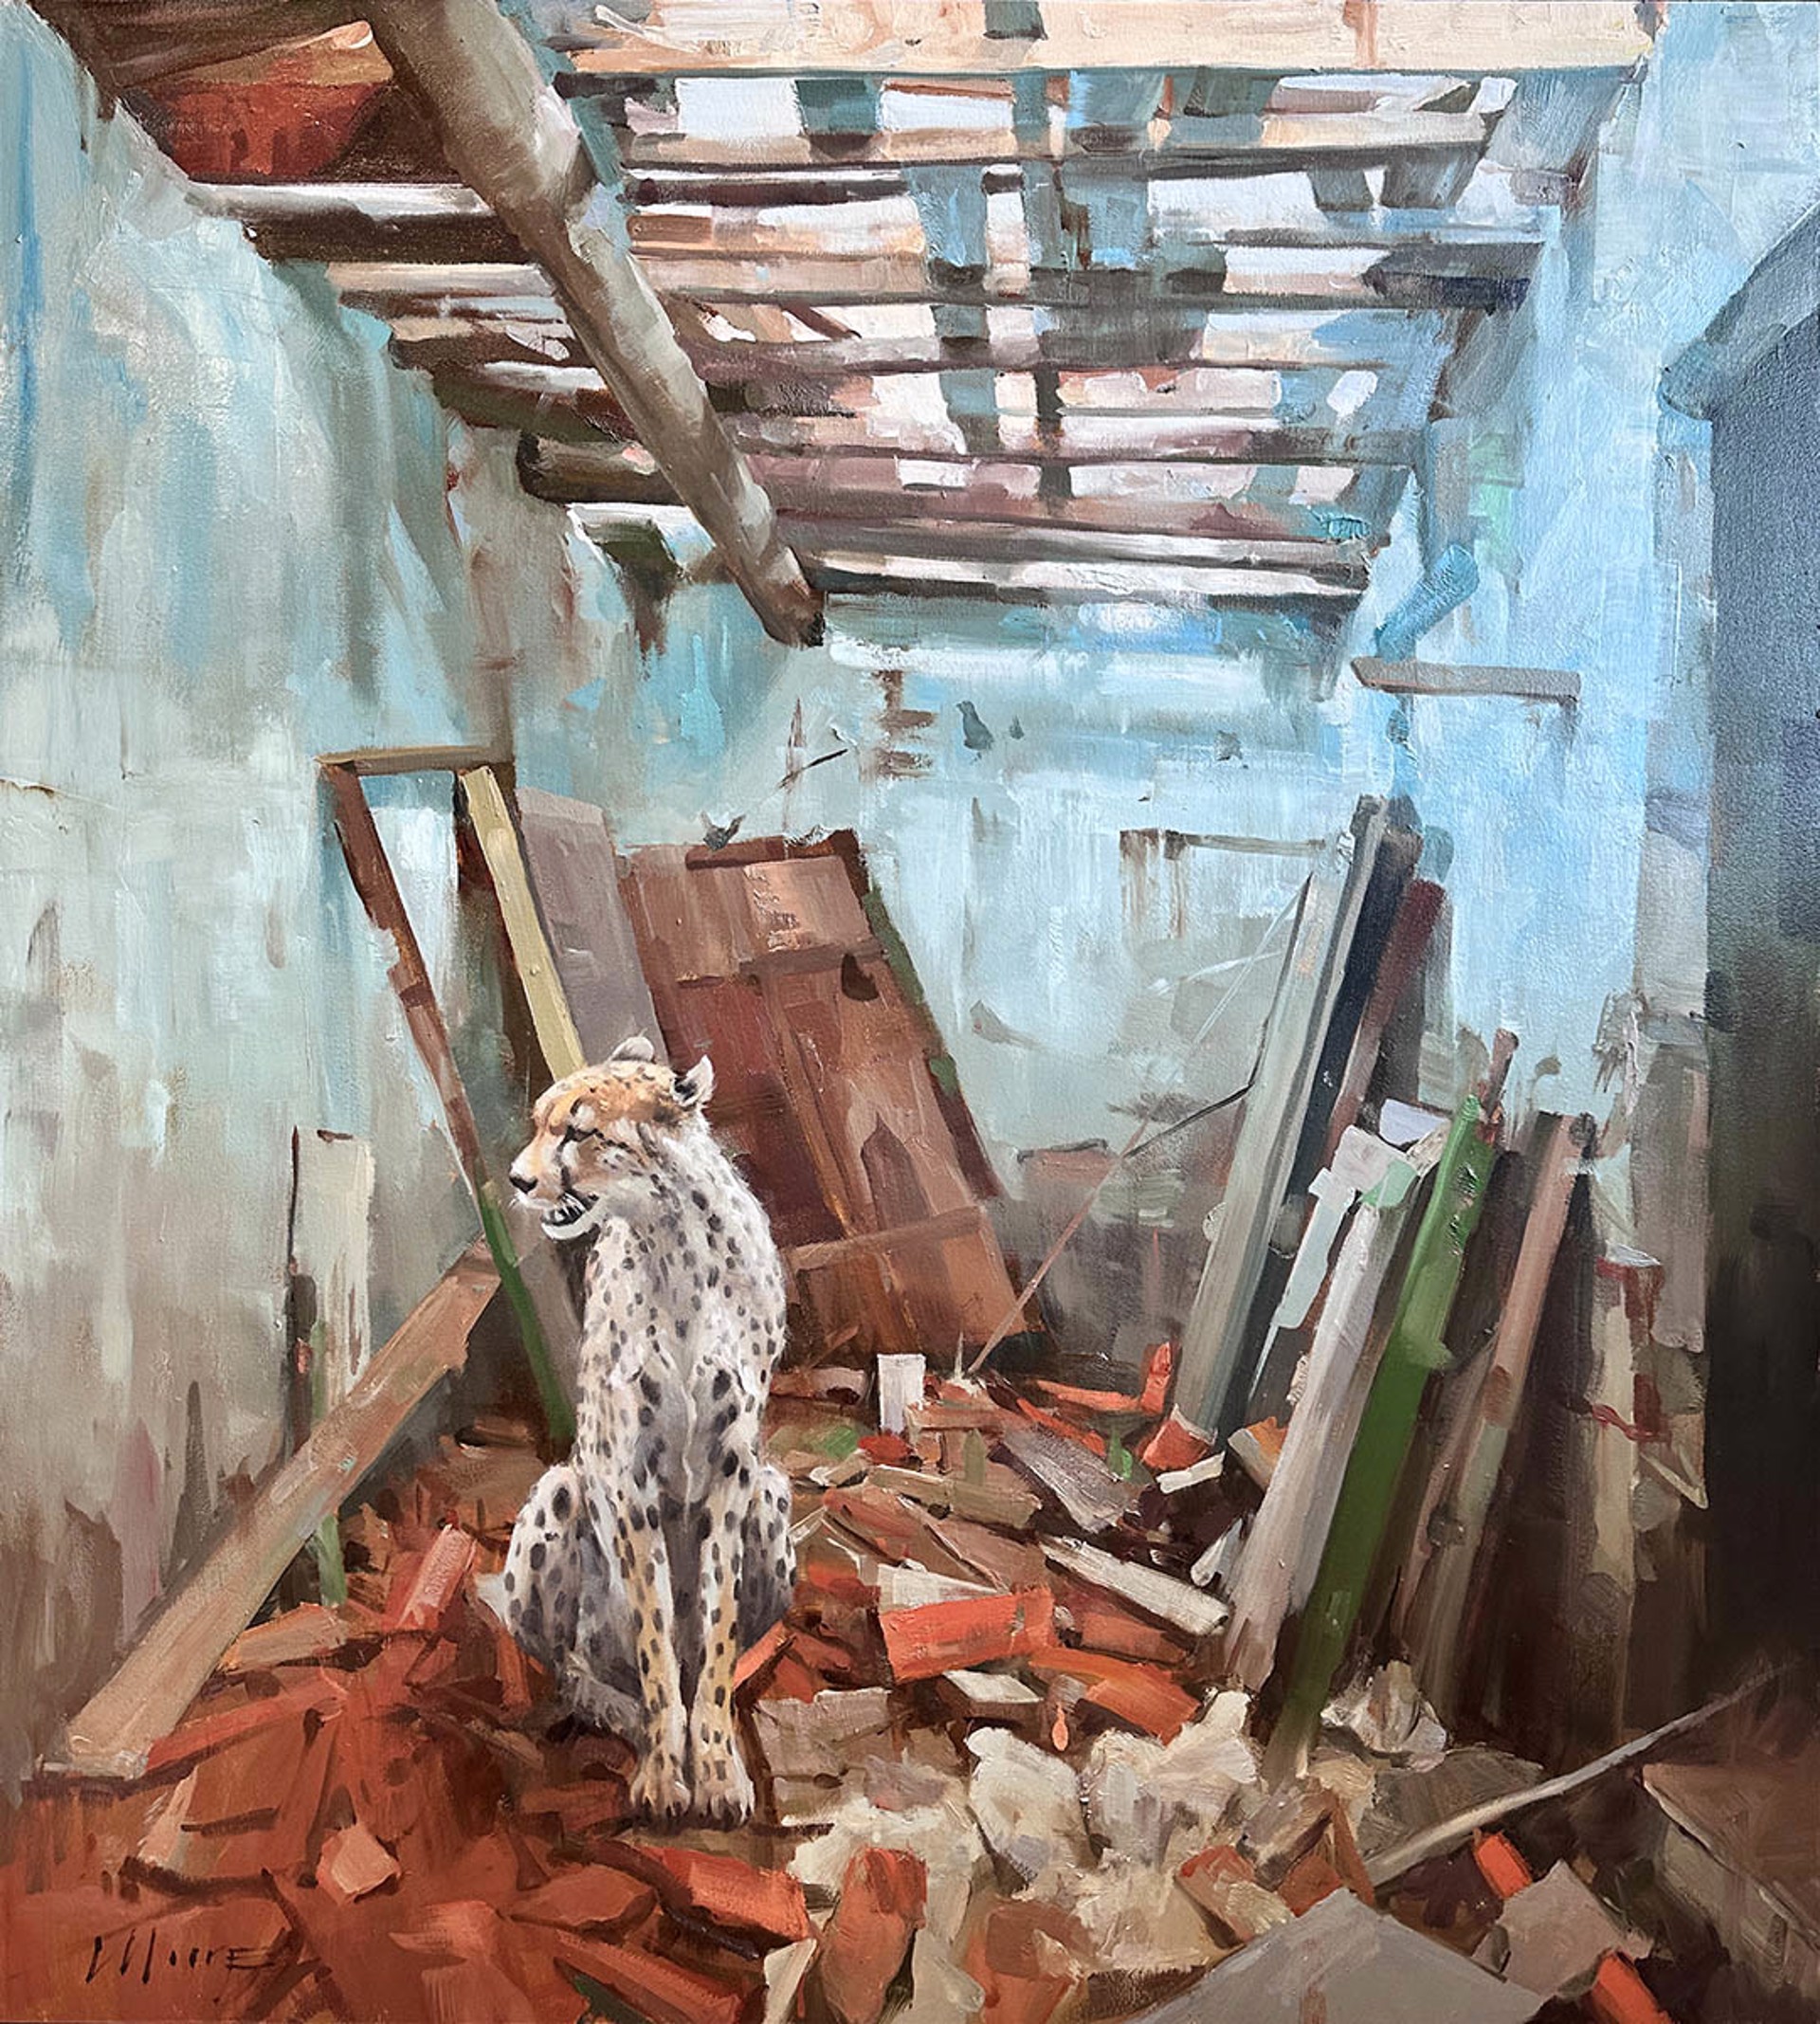 Original Oil Painting By Larry Moore Featuring A Seated Cheetah In An Abandoned Interior Space